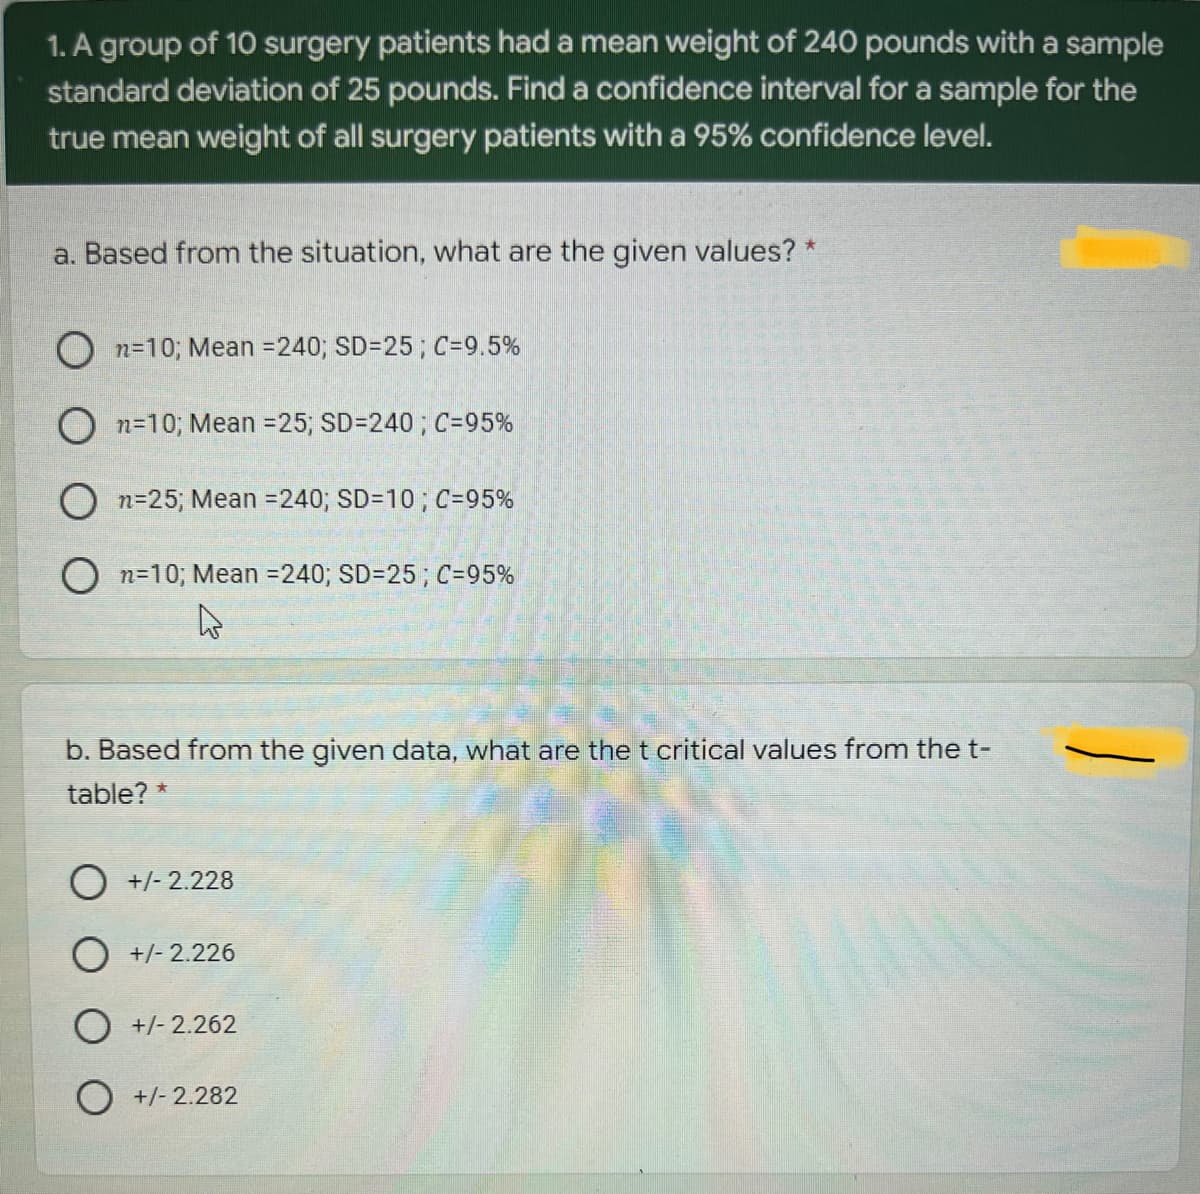 1. A group of 10 surgery patients had a mean weight of 240 pounds with a sample
standard deviation of 25 pounds. Find a confidence interval for a sample for the
true mean weight of all surgery patients with a 95% confidence level.
a. Based from the situation, what are the given values? *
O n=10; Mean =240; SD=25; C=9.5%
O n=10; Mean =25; SD=240; C=95%
O n=25; Mean =240; SD=10; C=95%
O n=10; Mean =240; SD=25; C=95%
b. Based from the given data, what are the t critical values from the t-
table?
O +/- 2.228
O +/- 2.226
O +/- 2.262
O +/- 2.282
